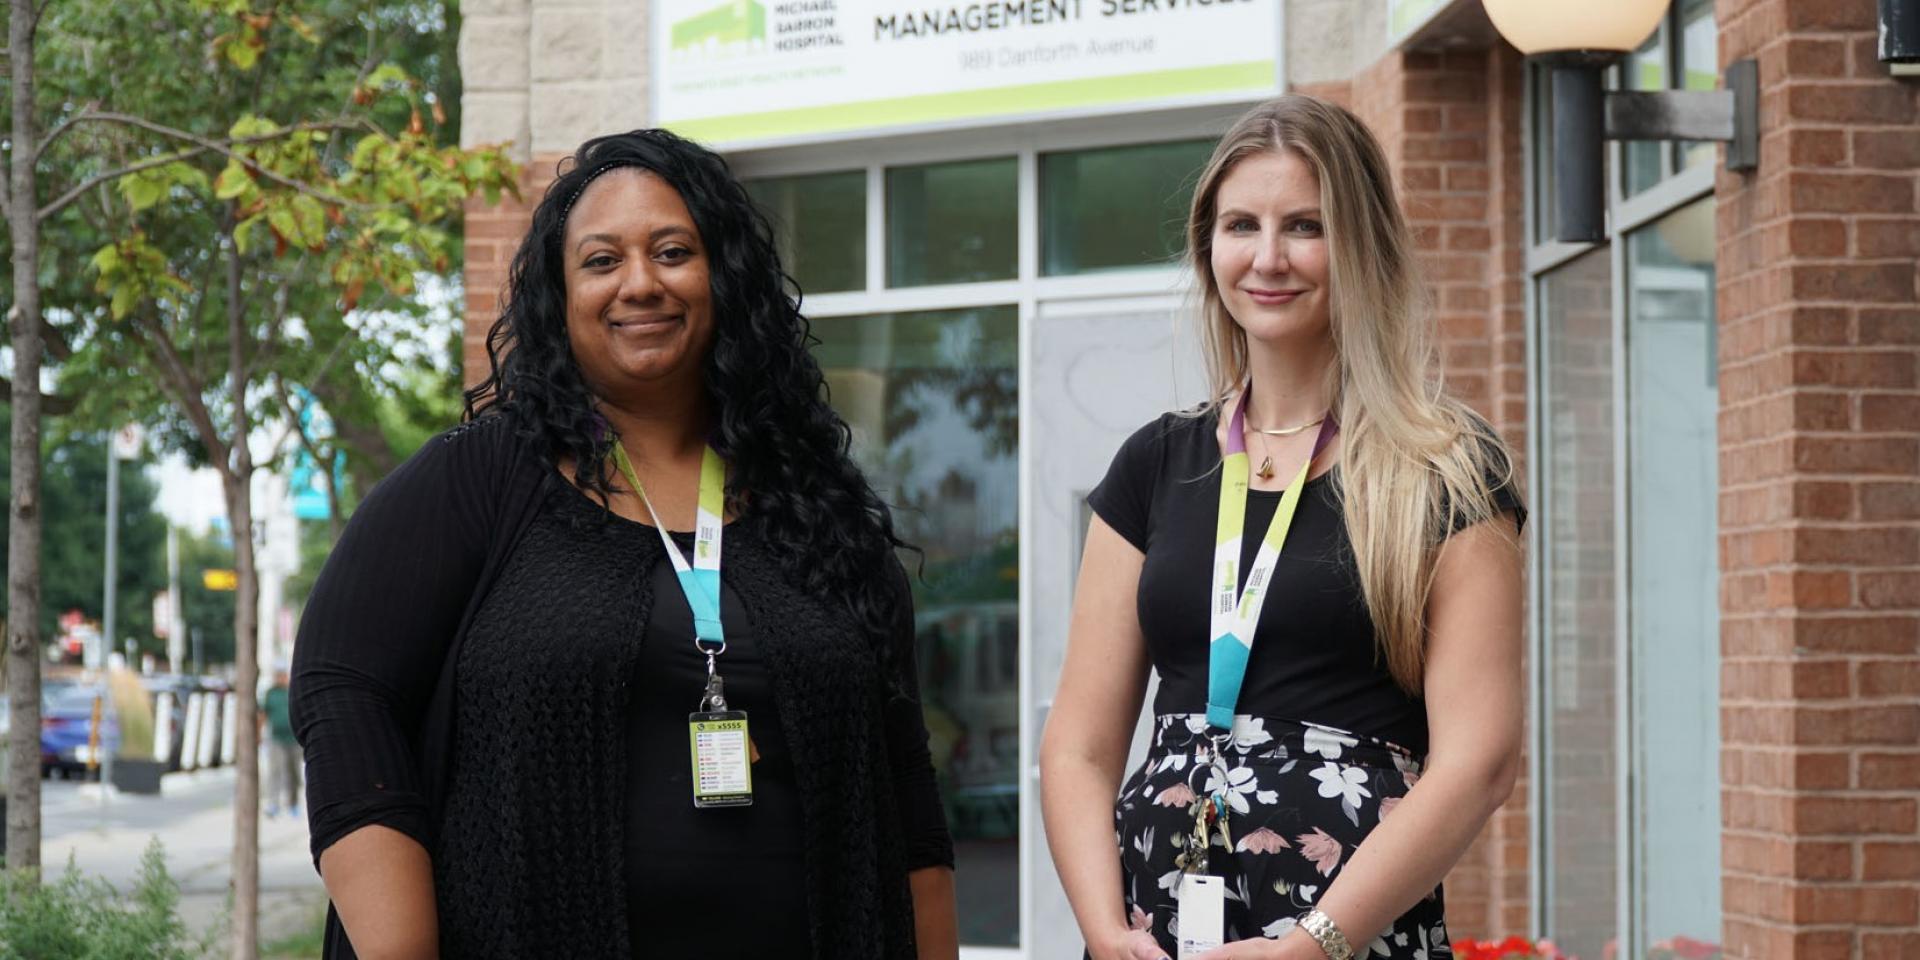 Krystle Brady and Kathryn Decker in front of Women's Withdrawal Management Services